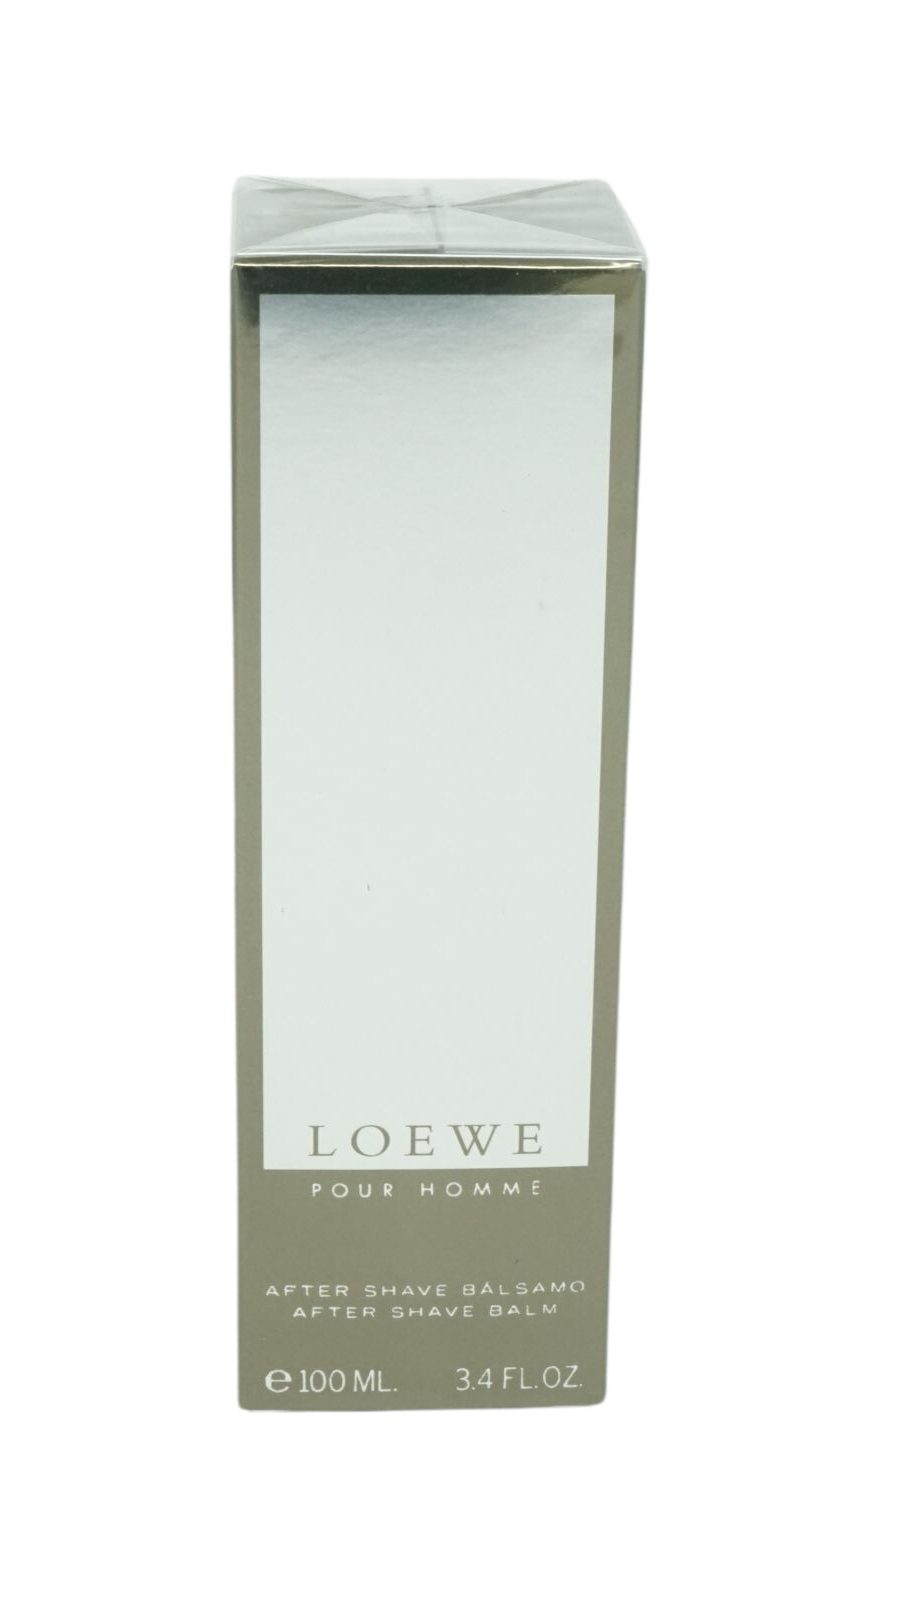 Loewe After-Shave Balsam 100ml Homme After Balm Loewe Shave Pour